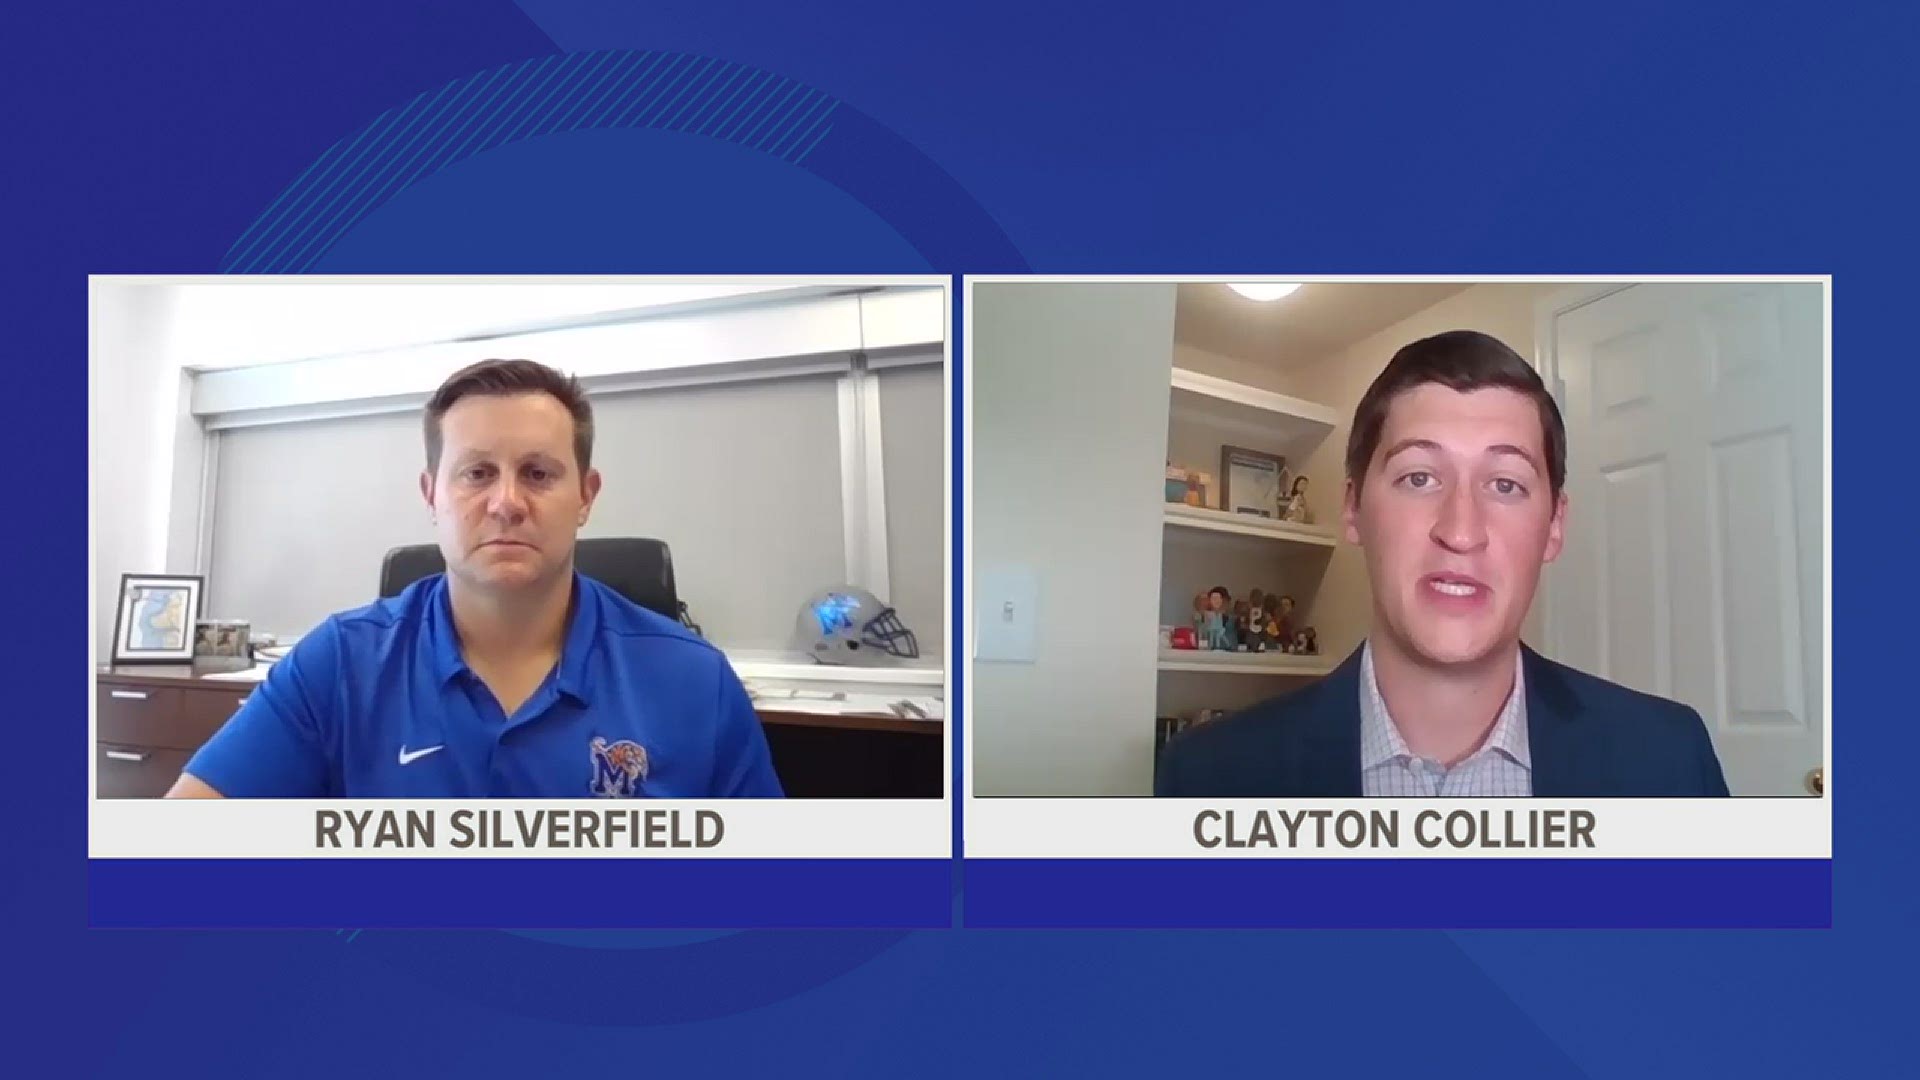 The Memphis head football coach spoke 1-on-1 with Local 24 Sports' Clayton Collier about the proposed CFP expansion